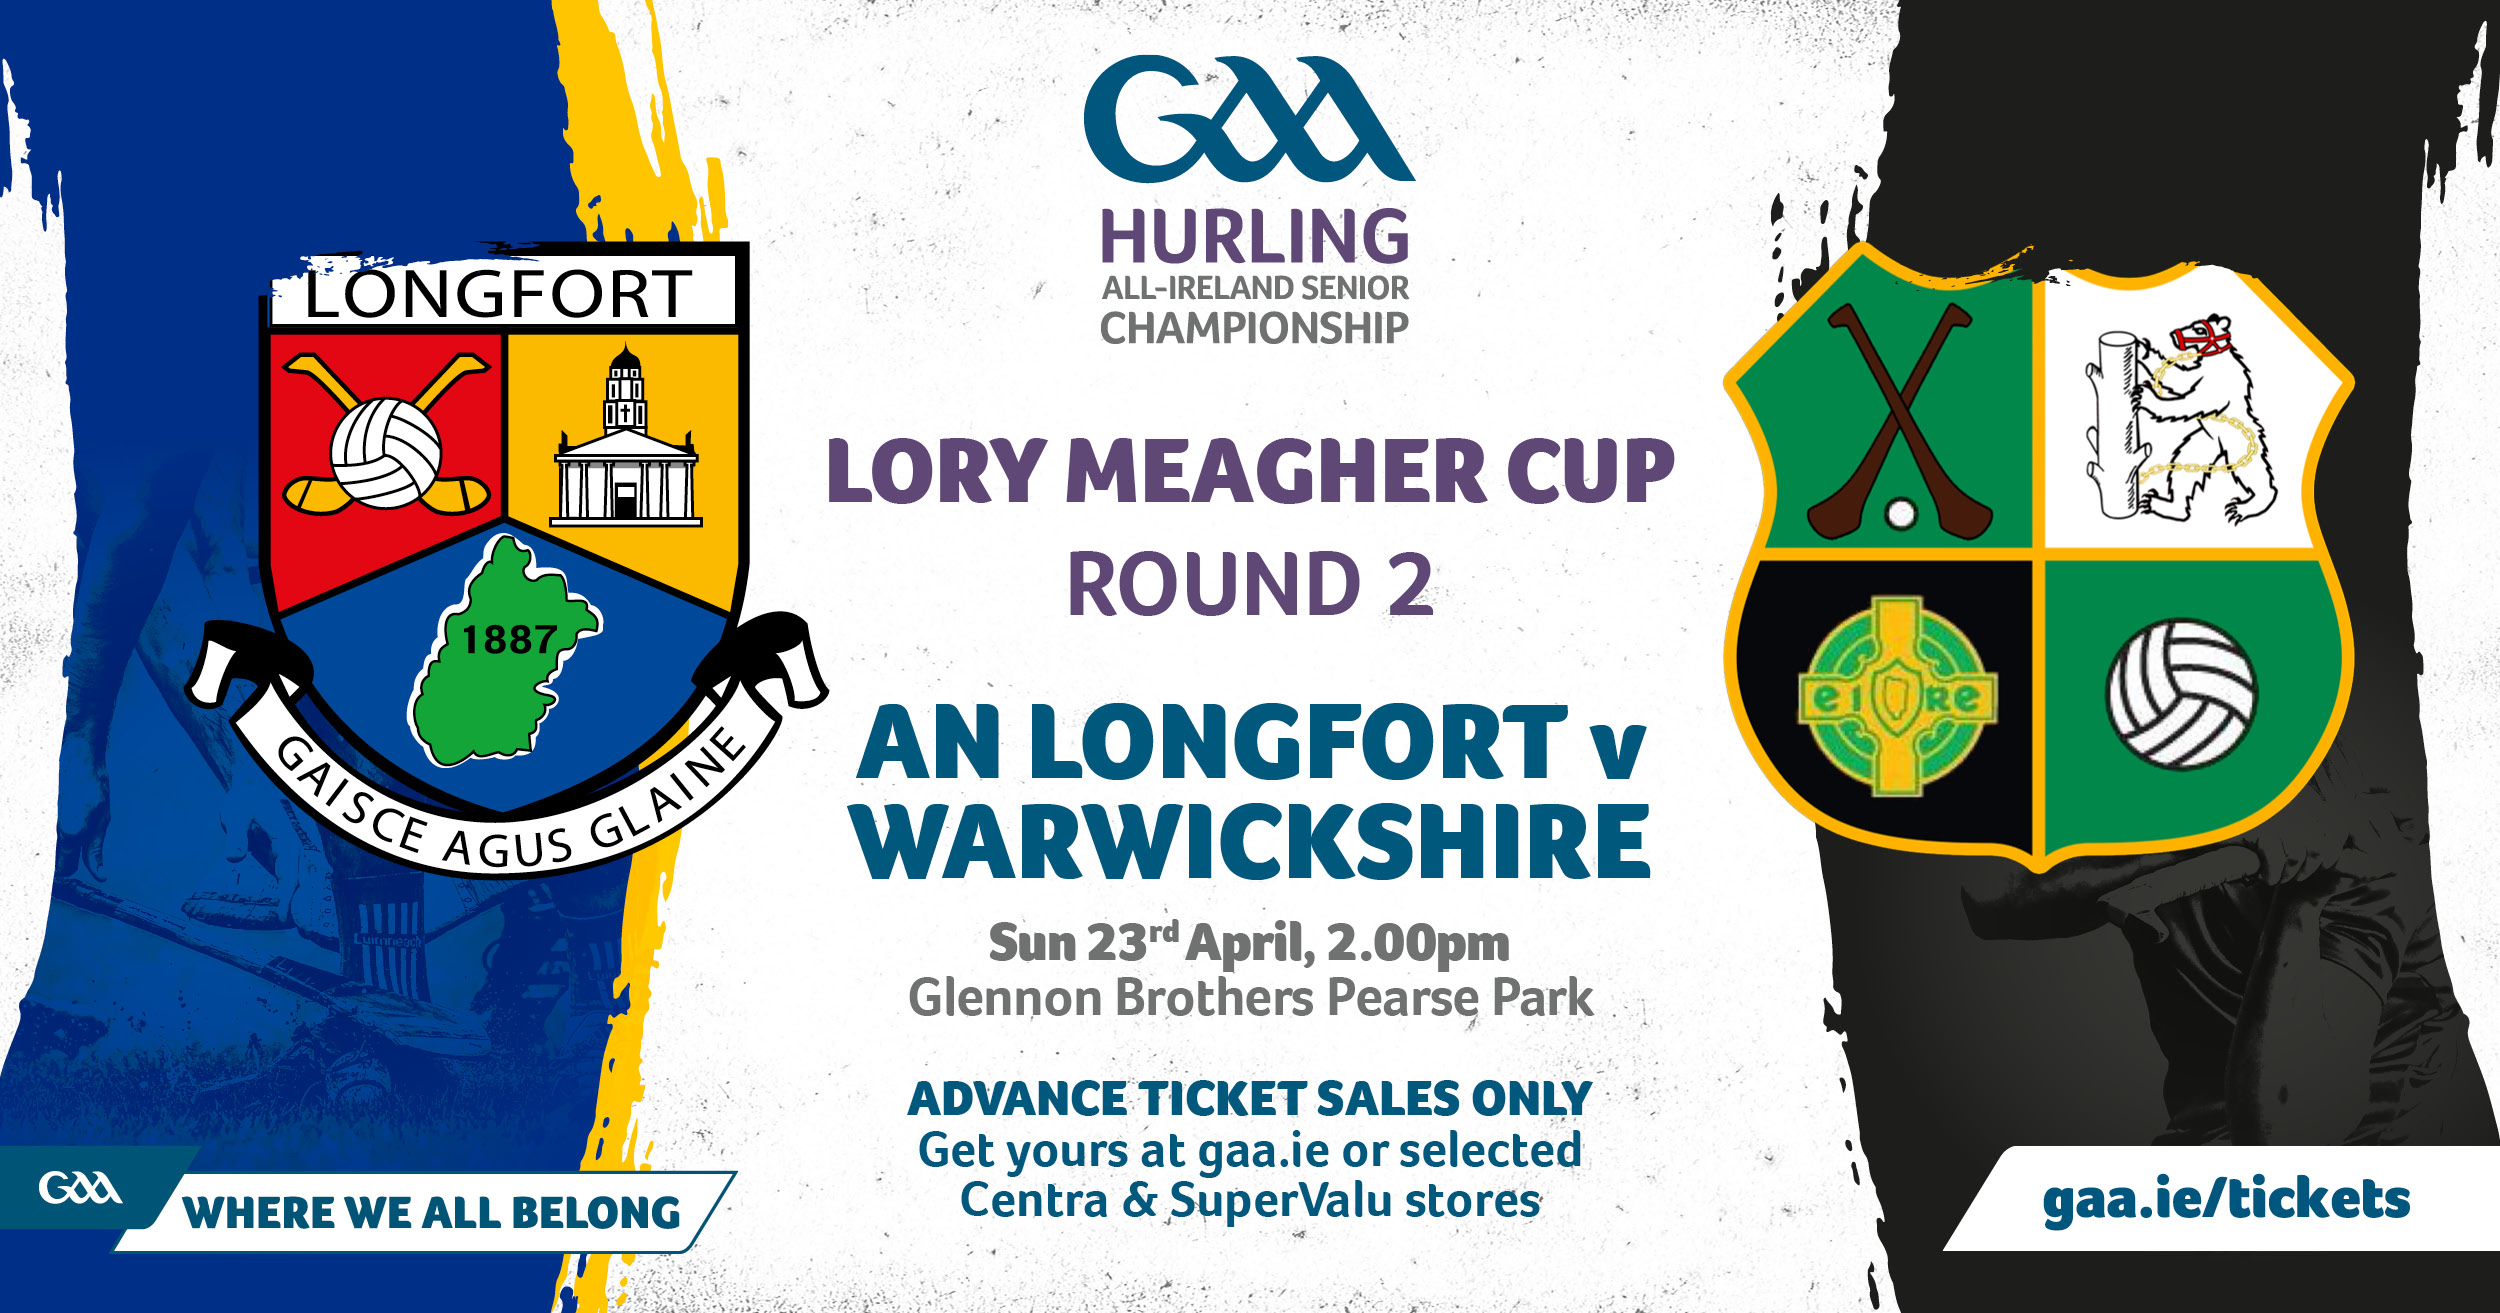 Lory Meagher Cup, Round 2: Longford vs Warwickshire – Match Recap